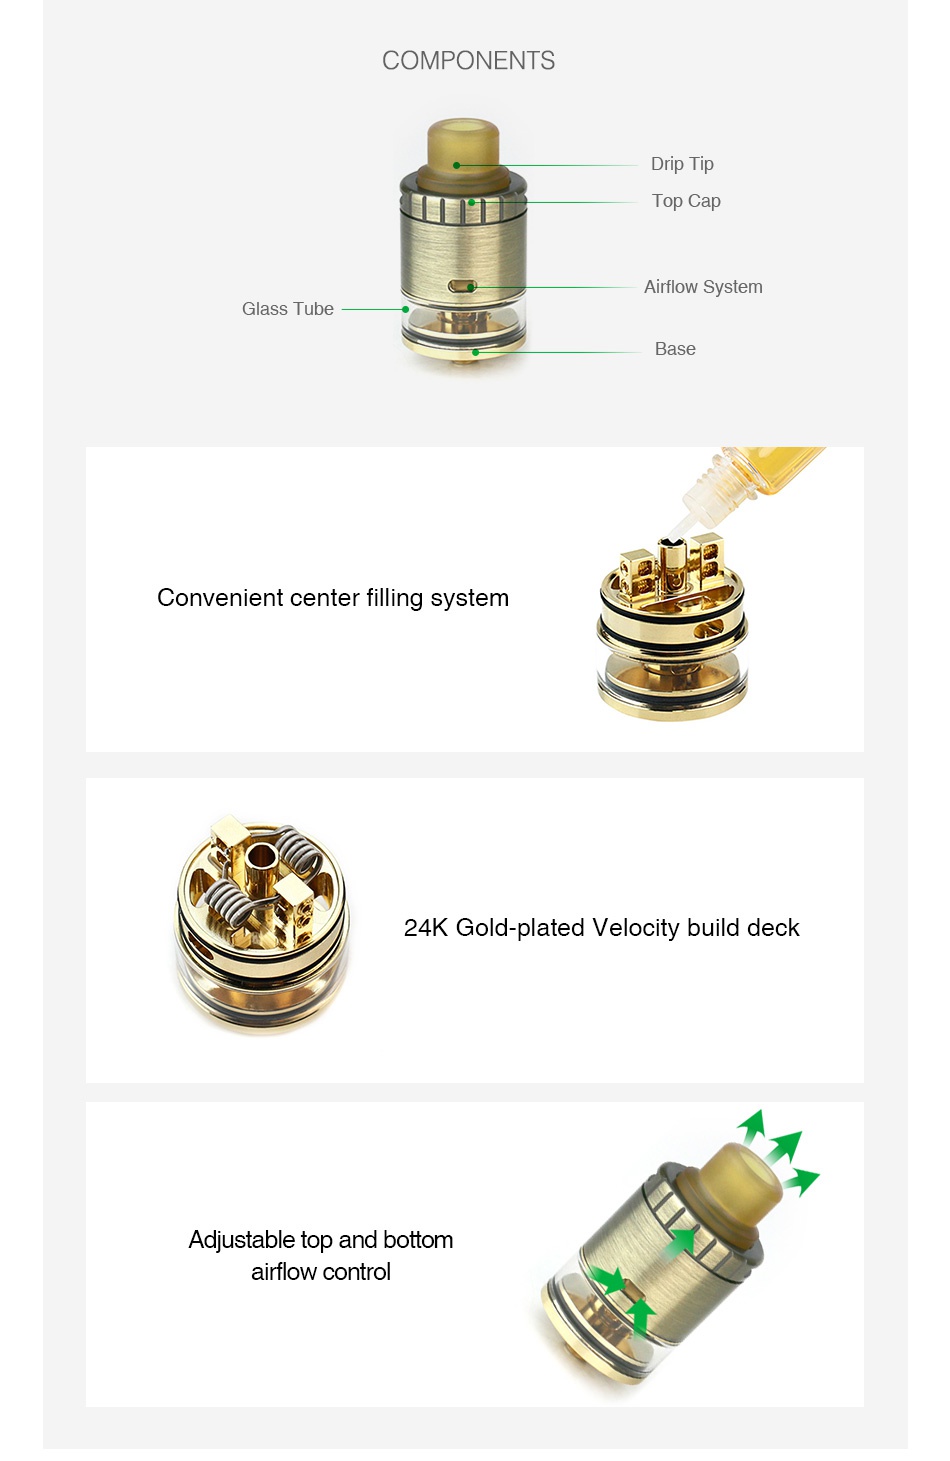 GTRS V12 RDTA 2ml COMPONENTS Drip Tip     Top Cap Airflow System Glass Tube Convenient center filling system 24K Gold plated velocity build deck Adjustable top and bottom rflow control